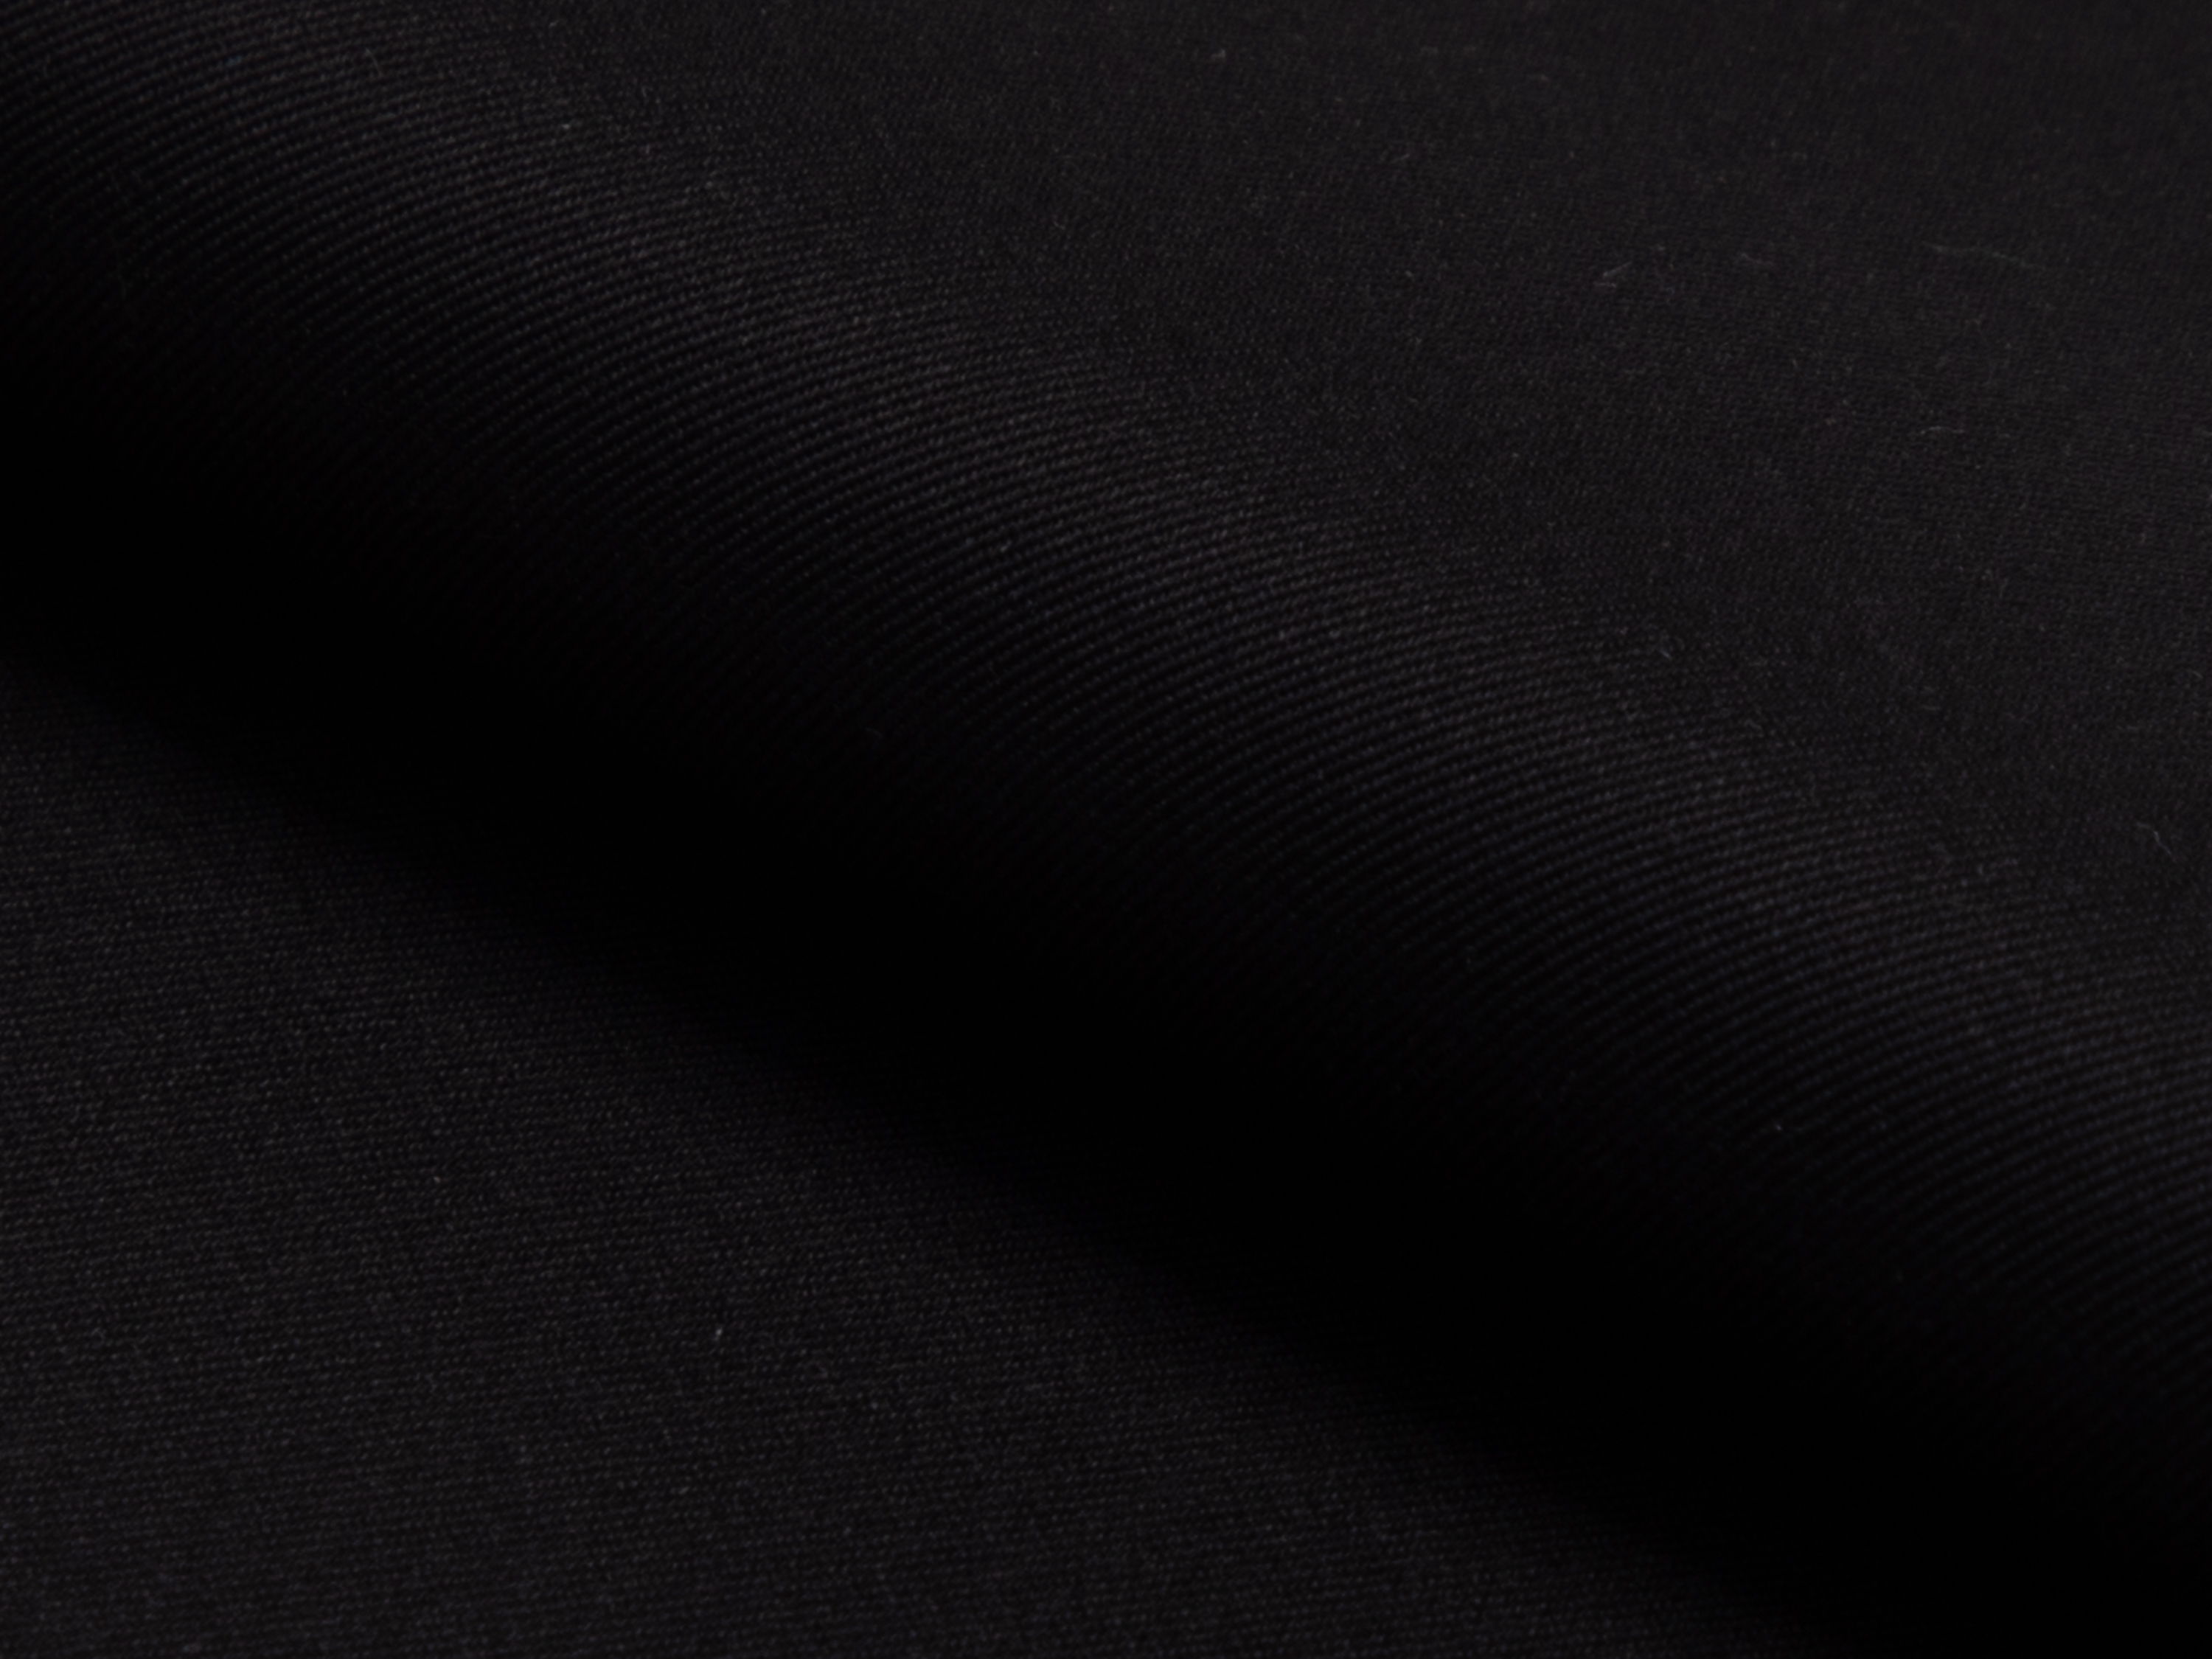 Buy tailor made shirts online -  - Twill Black